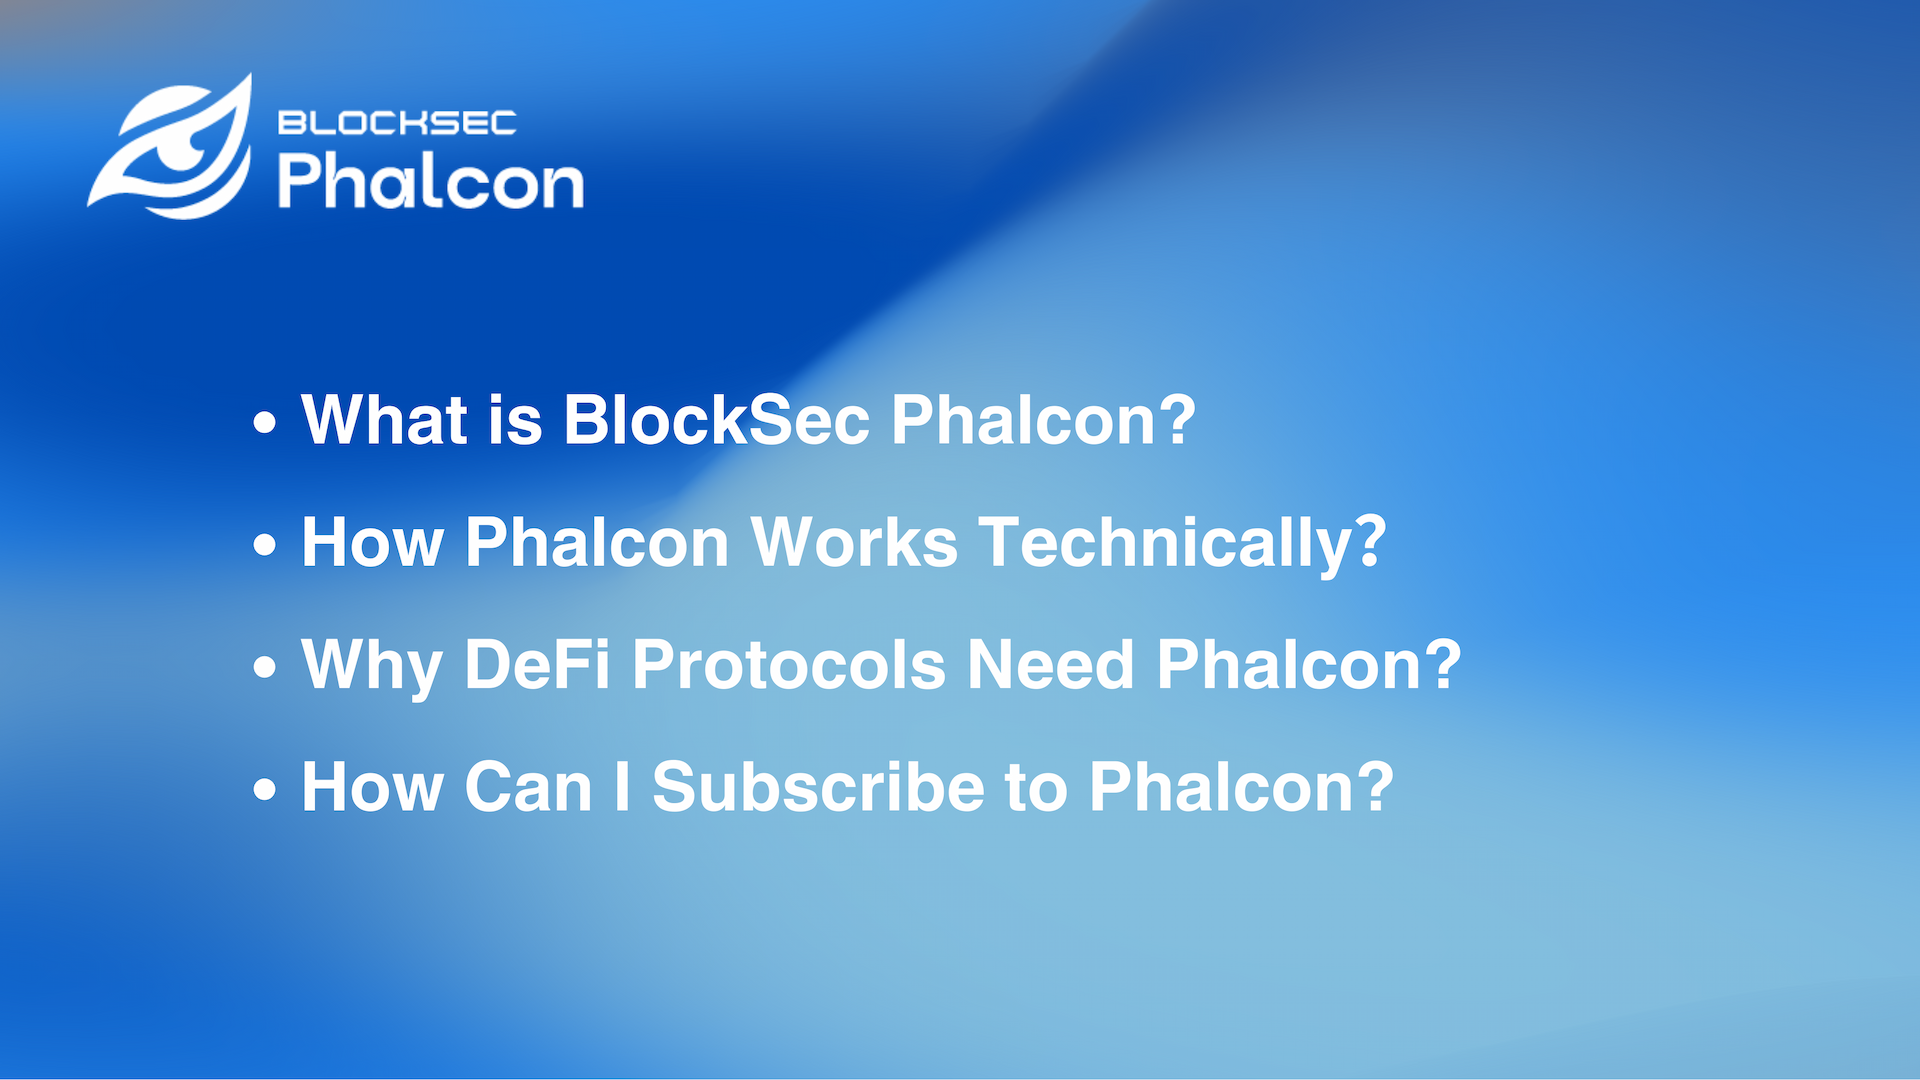 What Is BlockSec Phalcon? How Does Phalcon Accurately Identify and Rapidly Block Hacker Attacks?